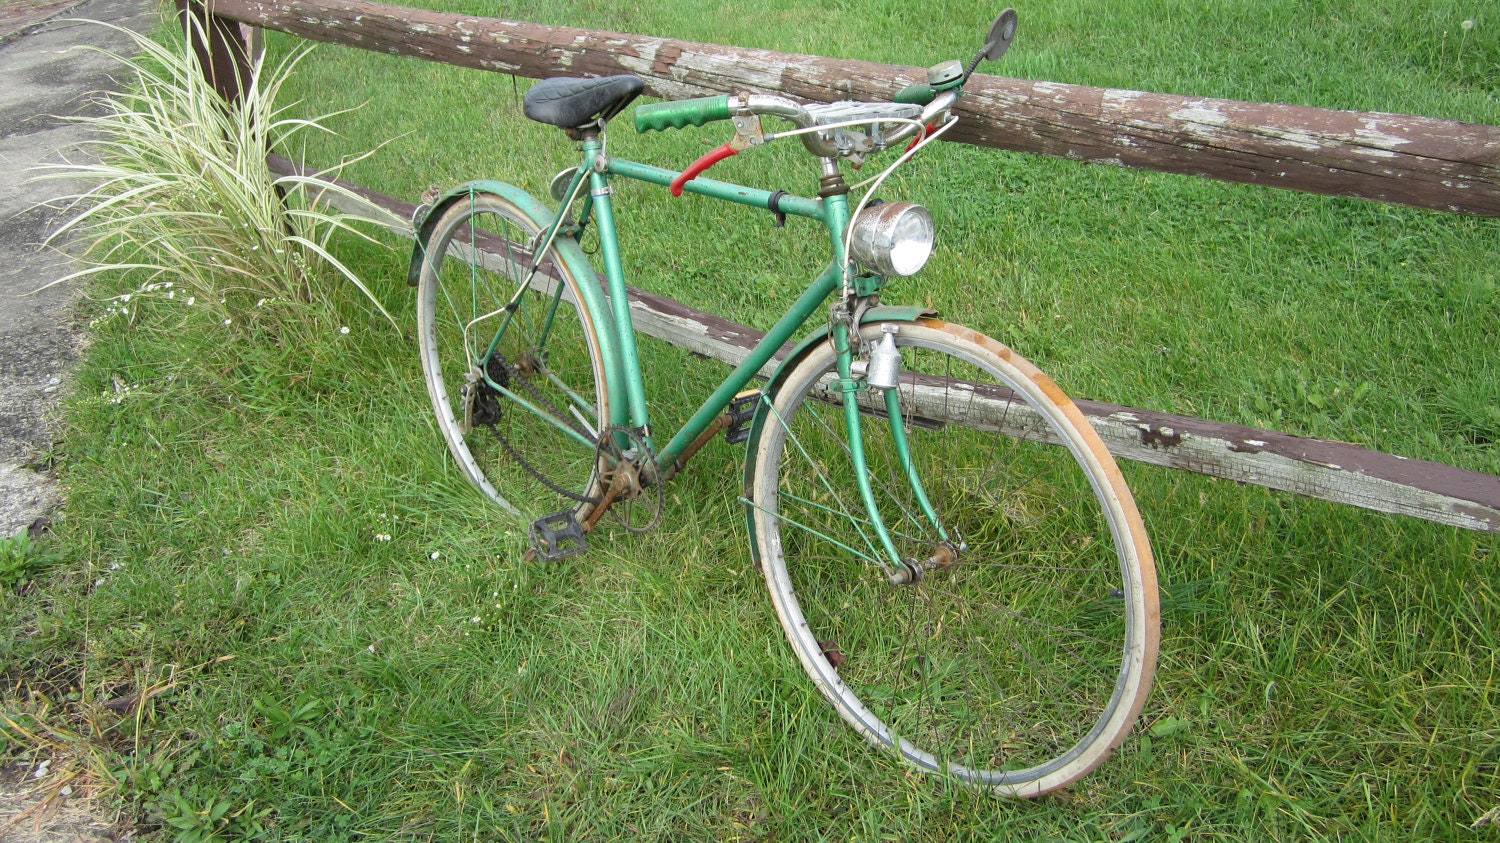 Antique Bicycle Mens Green Rusted Rusty Old Bike Country Rustic Decor Vintage Bicycle 1960s - TheOldTimeJunkShop